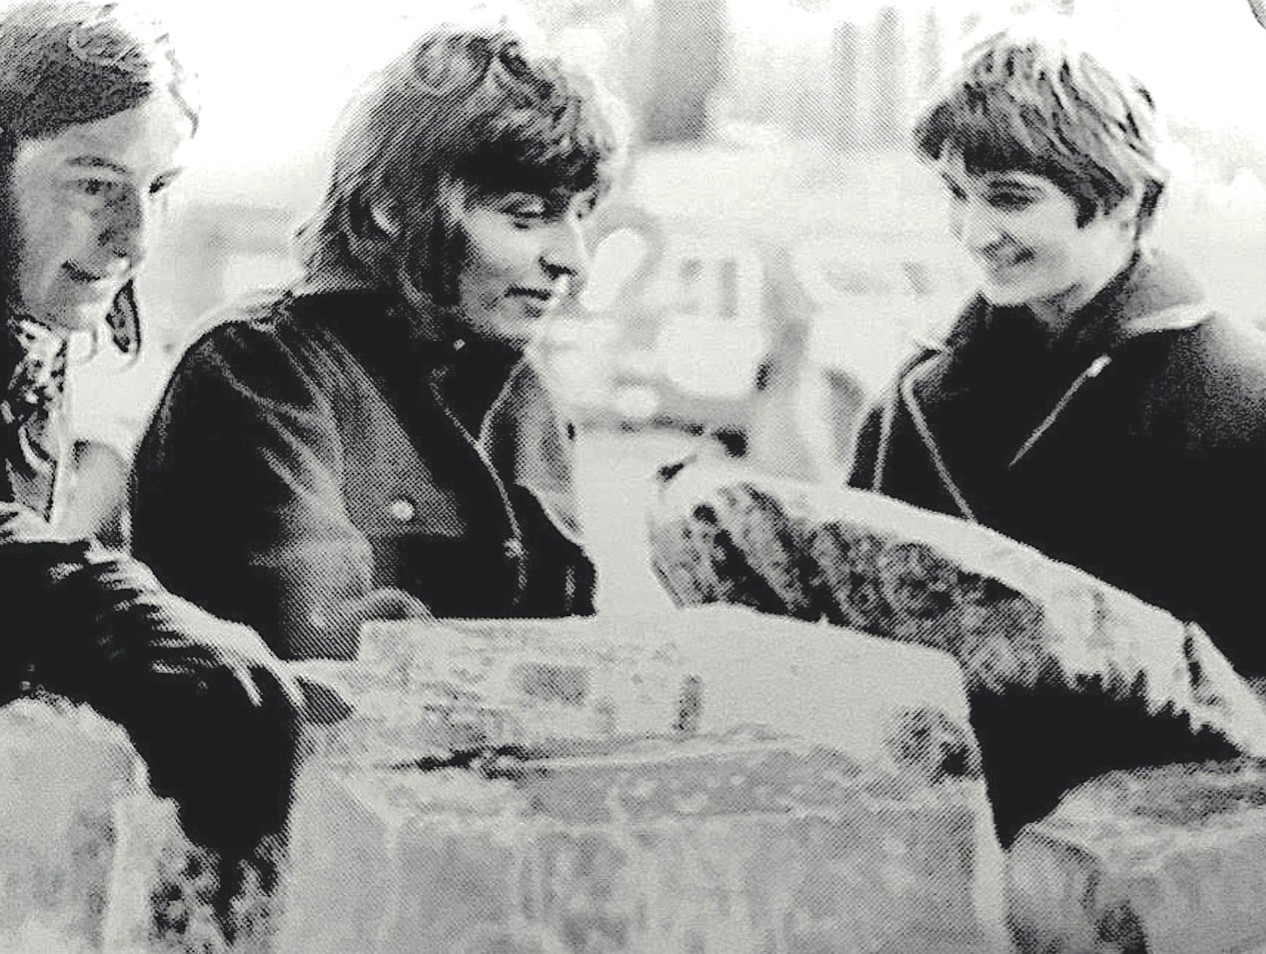 Sidney Abbott, Ellen Broidy, and Michela Griffo getting the ice blocks ready for the Gay Liberation Front women’s dance at Alternatew University, New York, NY, 1970. Photo courtesy of Michela Griffo.